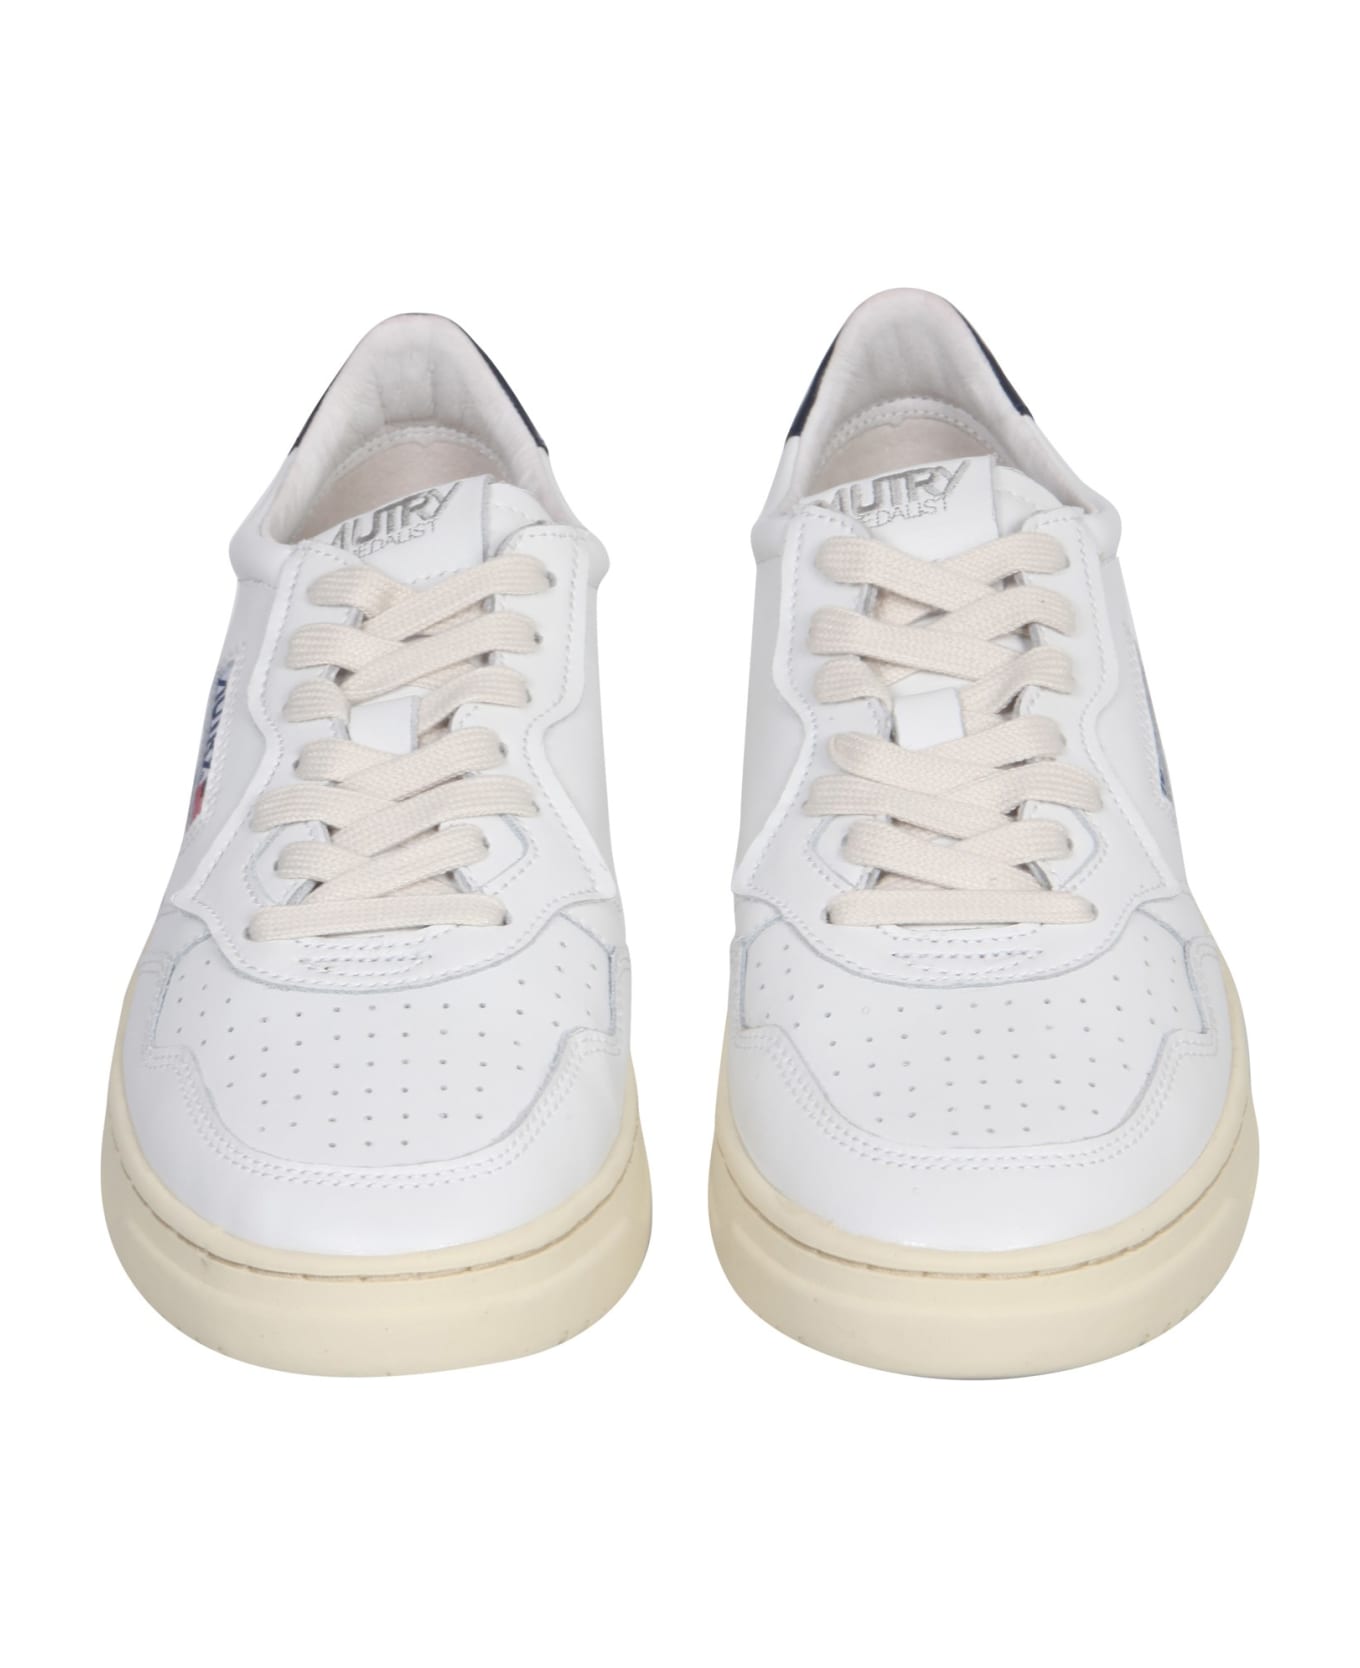 Autry Medalist Low Sneakers In White And Navy Blue Leather - Bianco